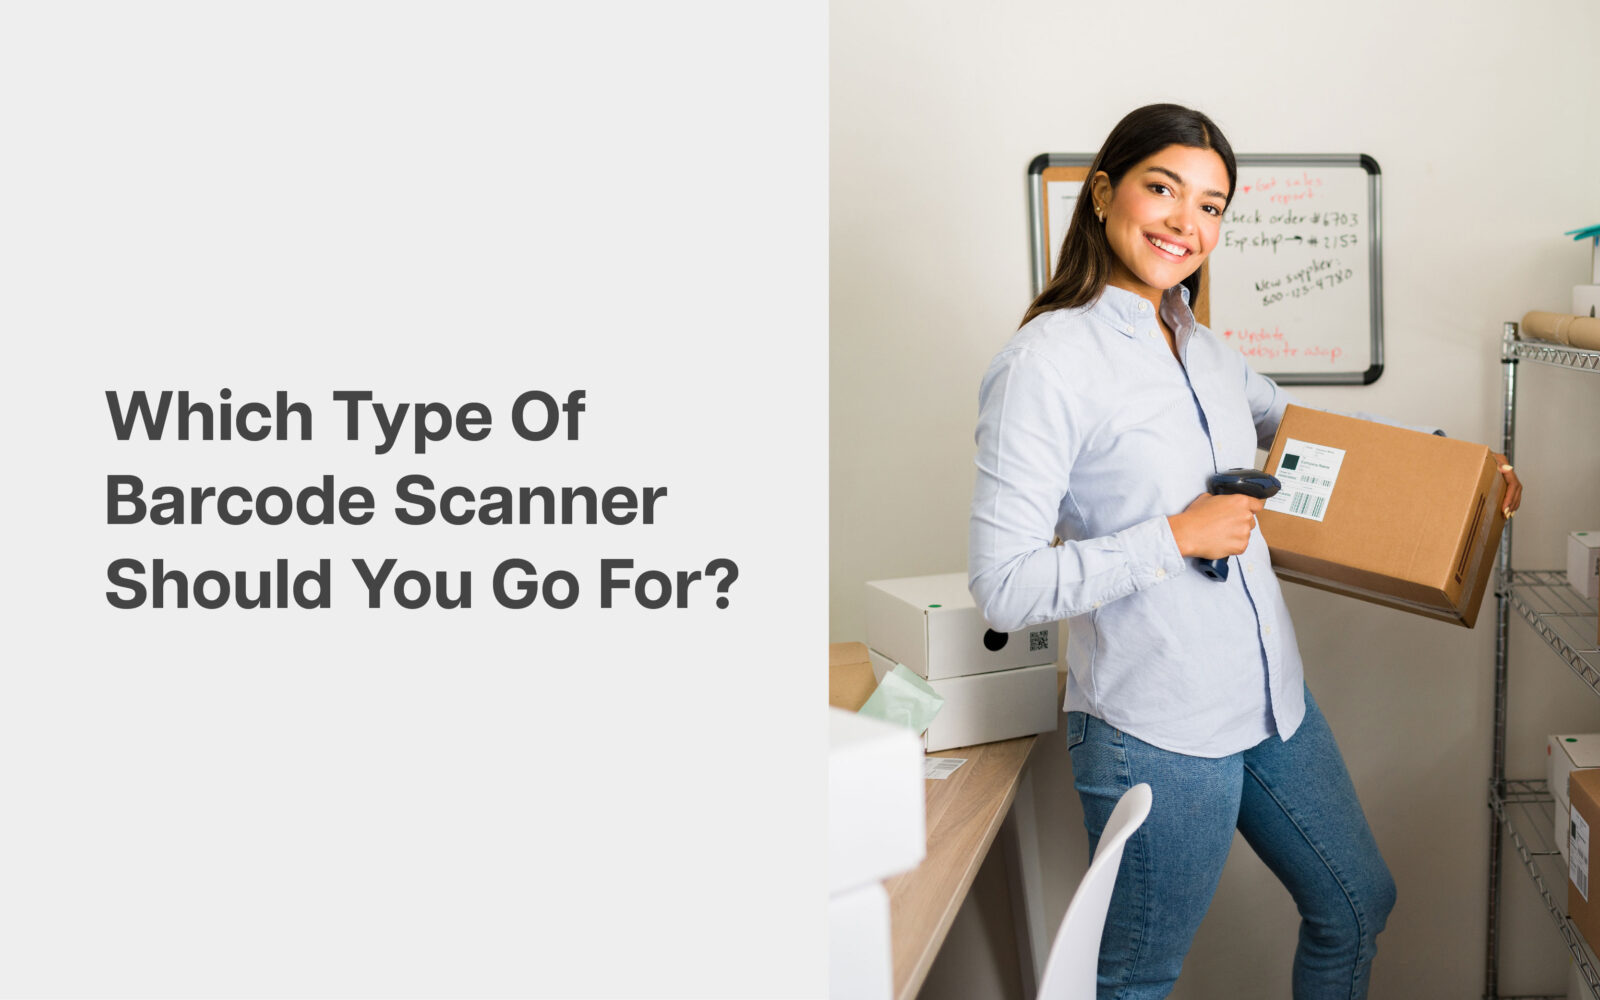 Which Type Of Barcode Scanners Should You Go For?